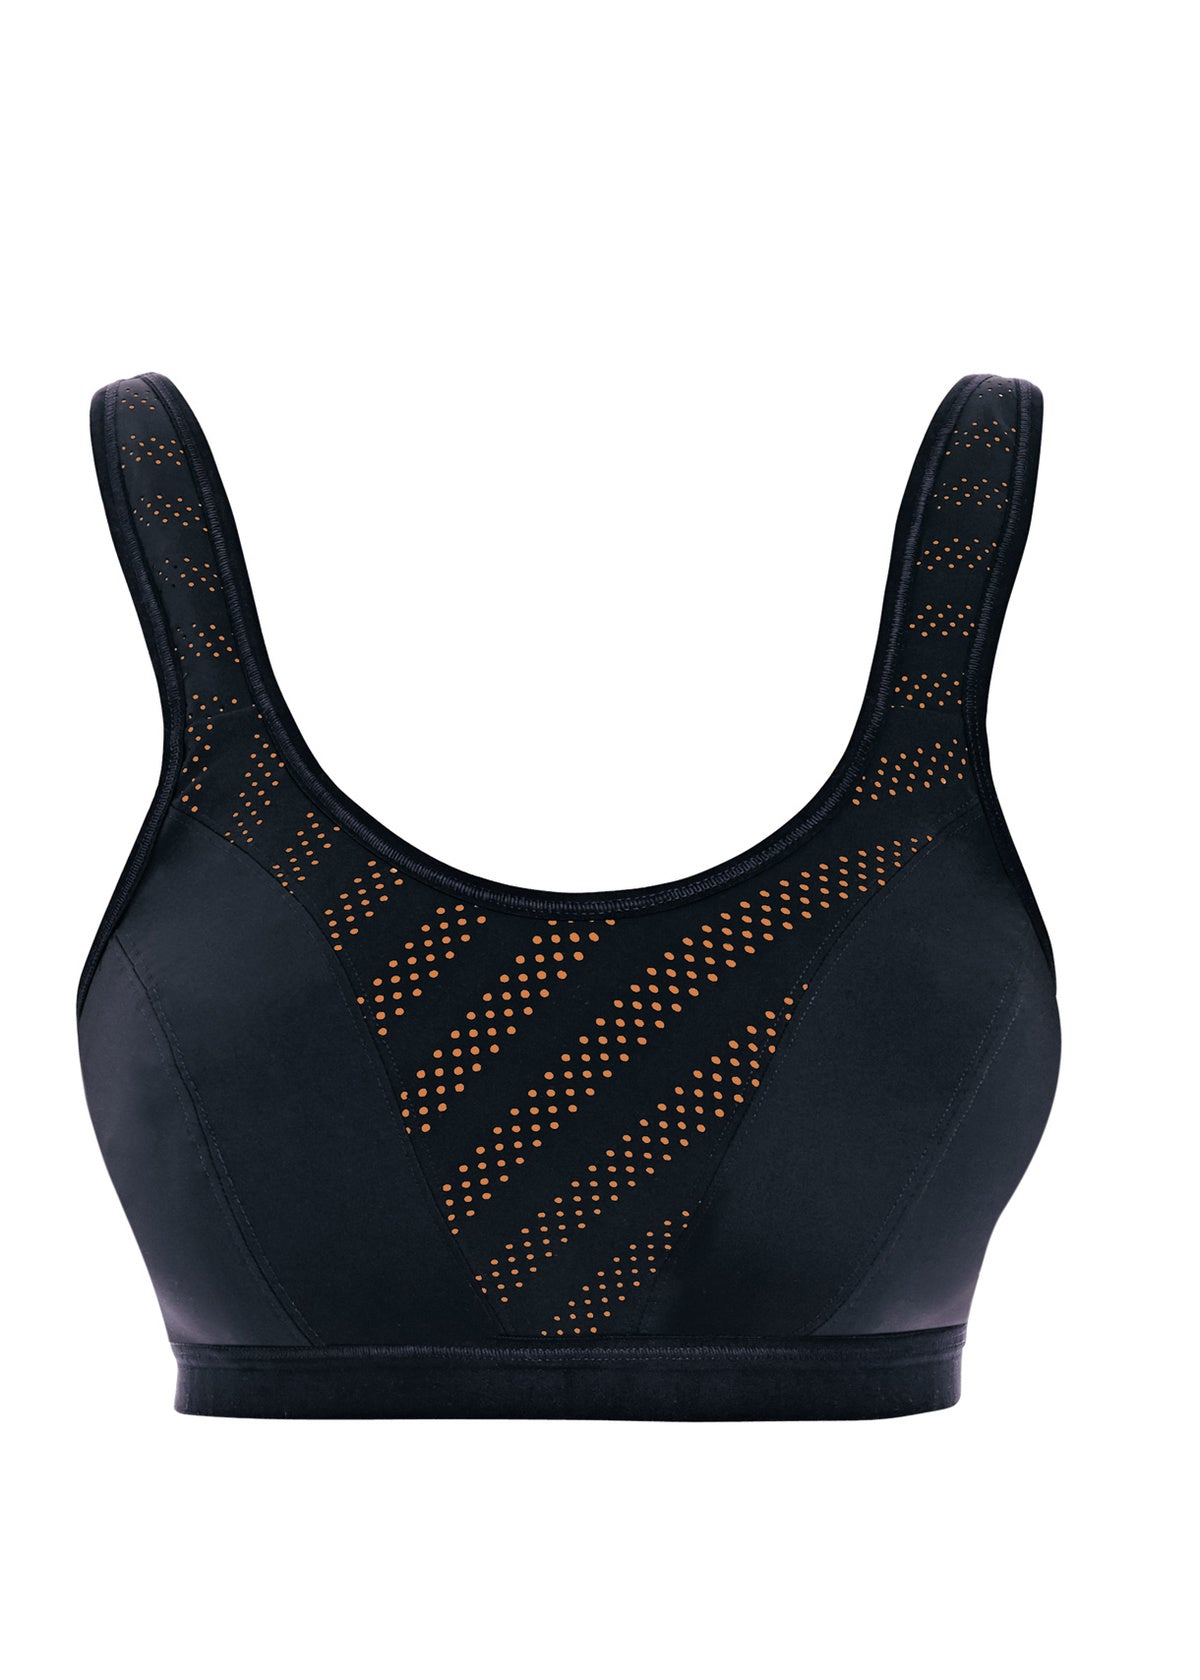 Free People Movement Halo Crop Top Sports Bra Navy Small NWT - Schimiggy  Reviews